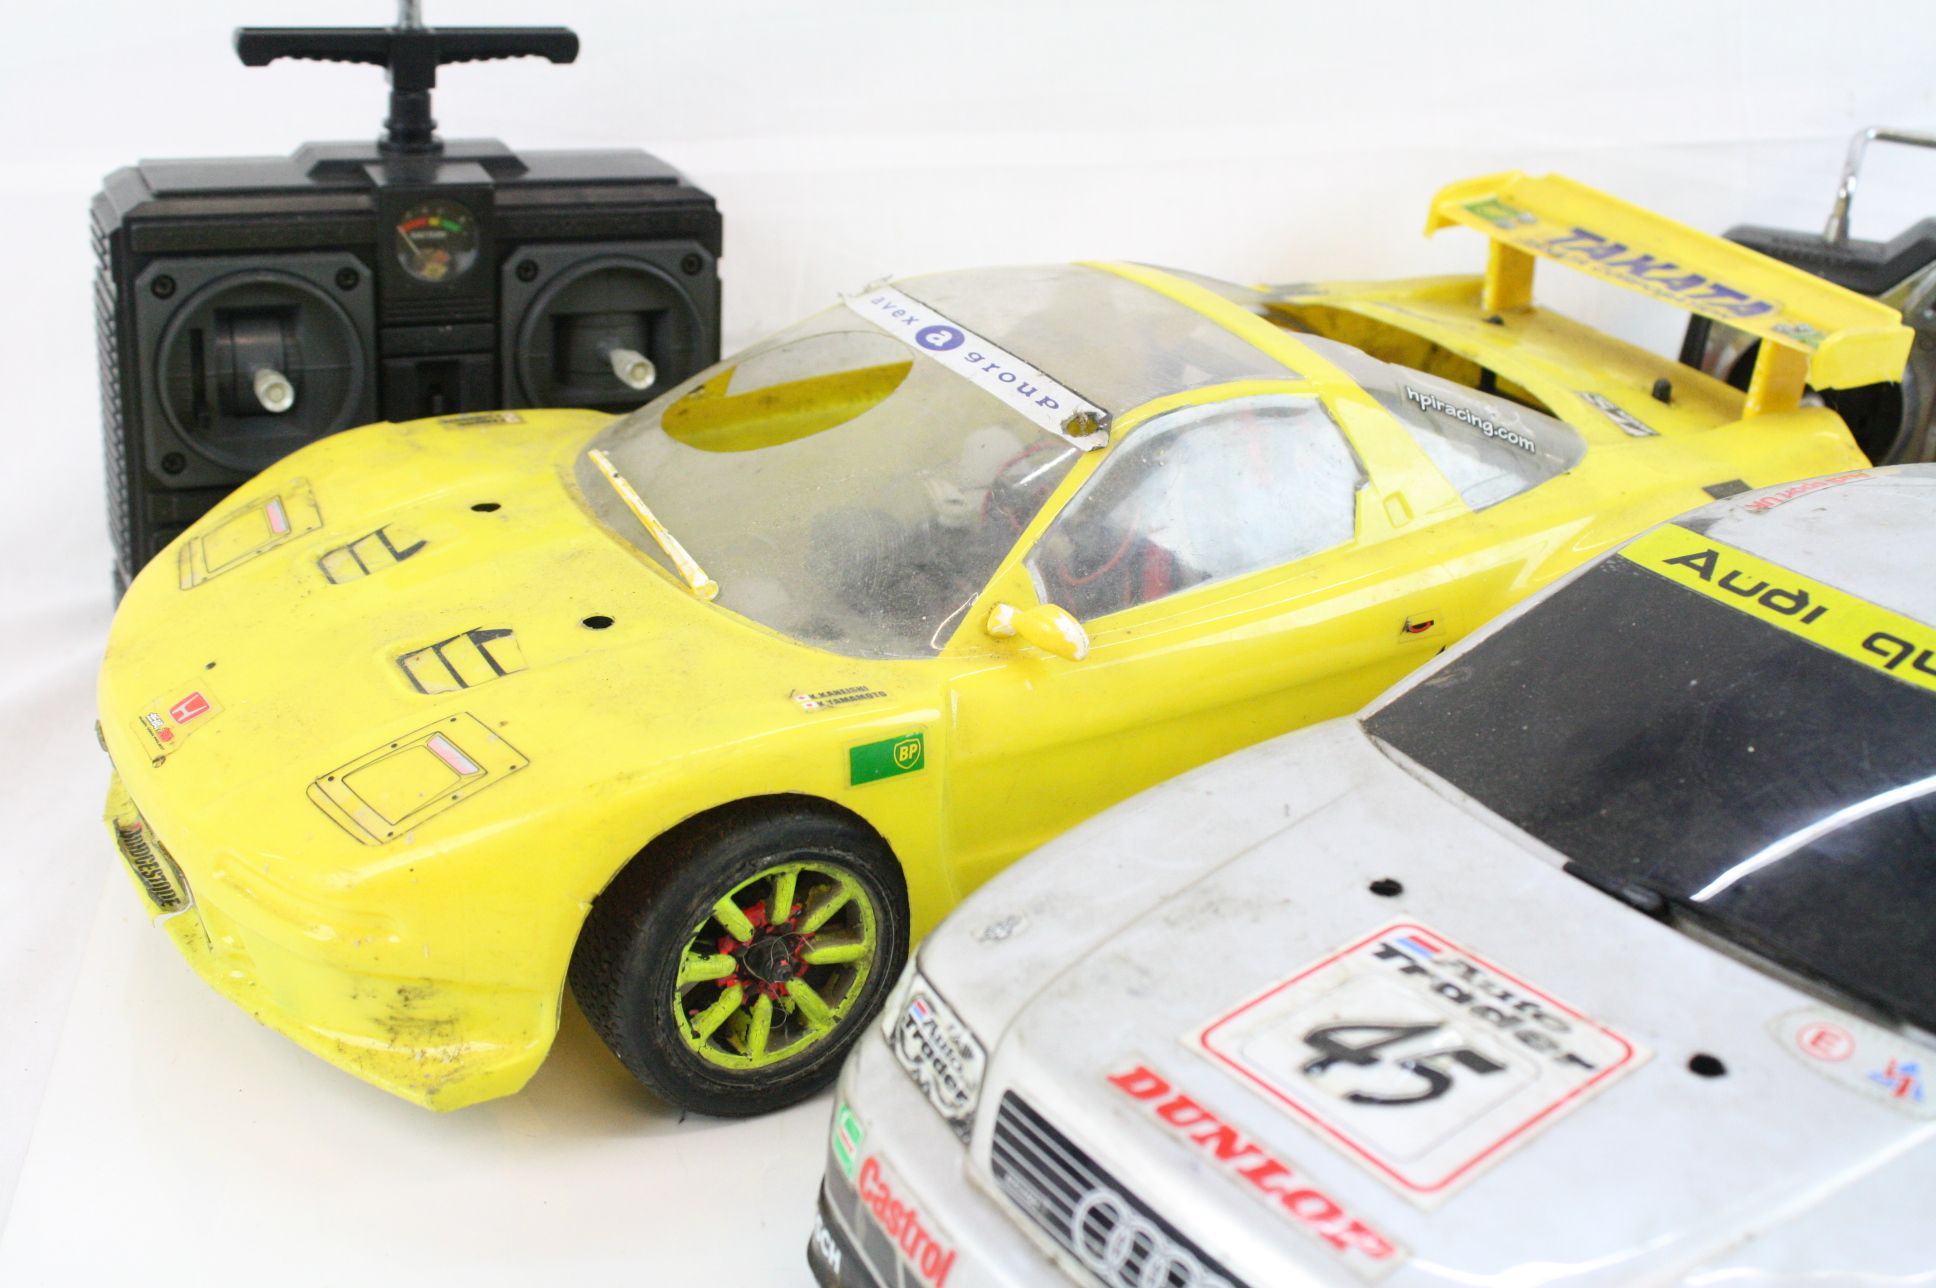 A Kyosho Nitro 4WD remote control car on an alloy chassis with a belt driven GX11X engine and a - Image 3 of 8